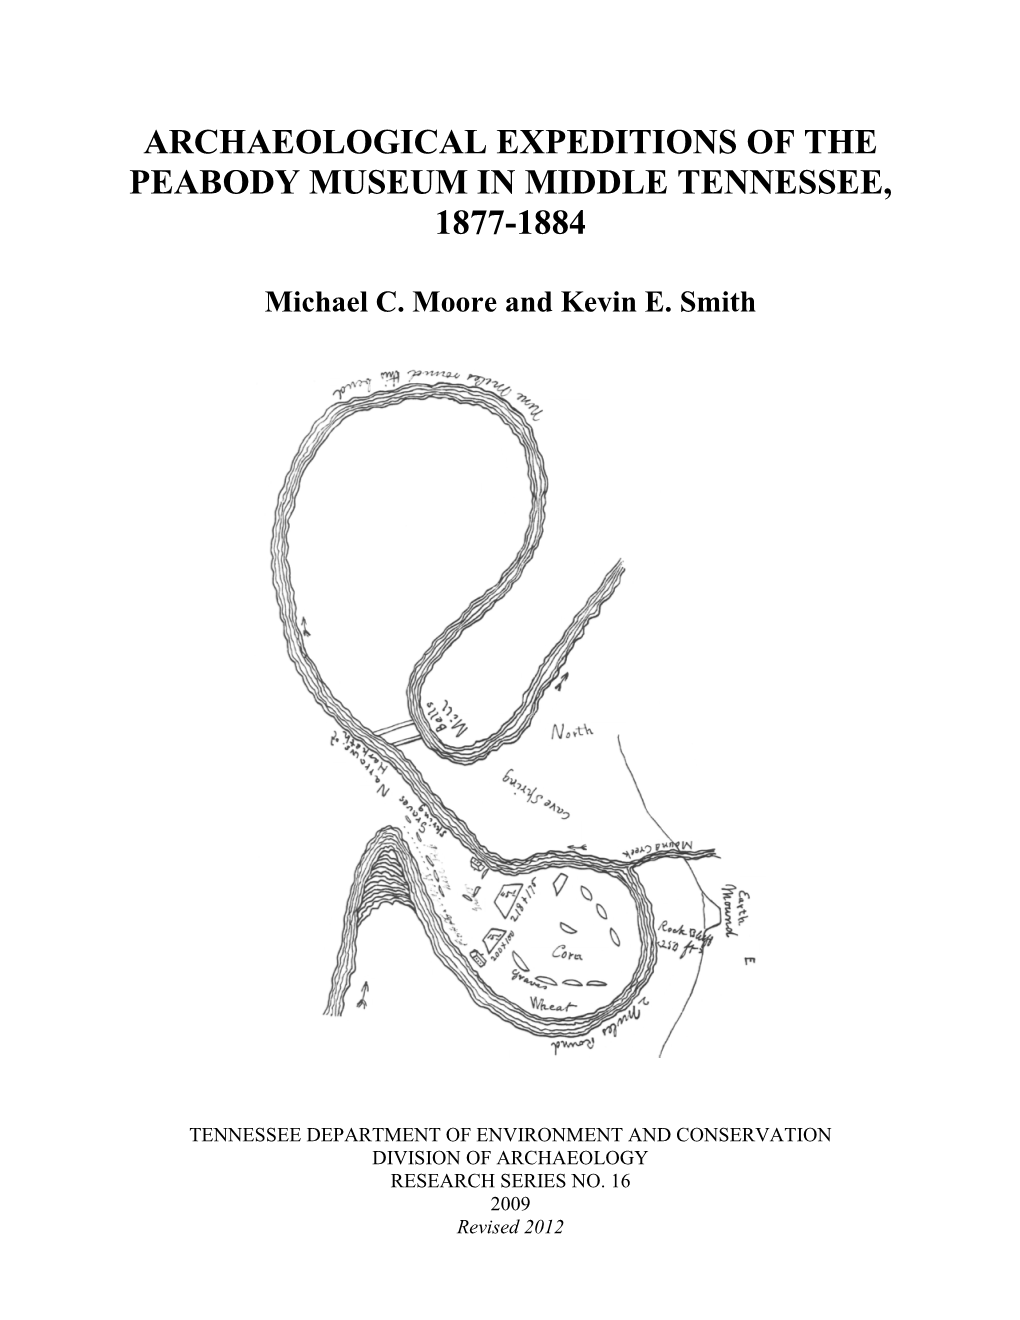 Archaeological Expeditions of the Peabody Museum in Middle Tennessee, 1877-1884